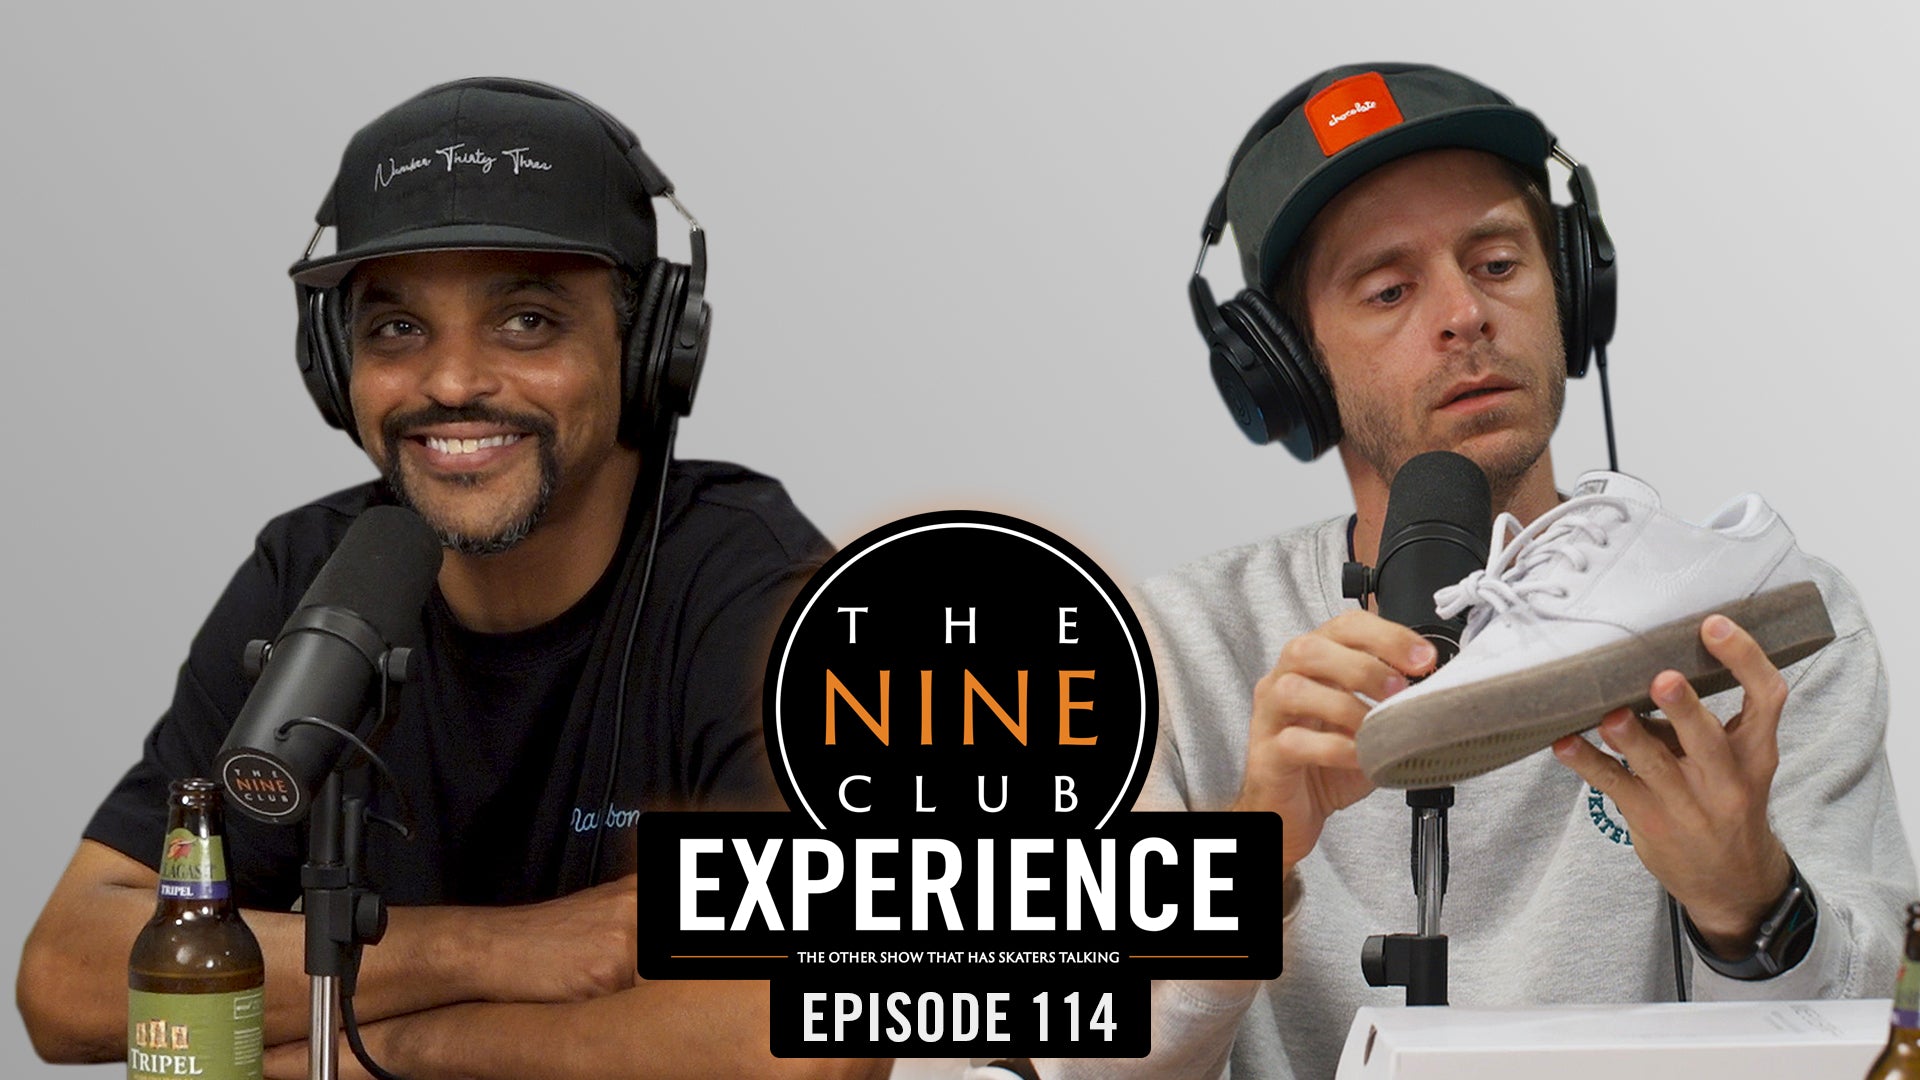 The Nine Club Experience Episode 114